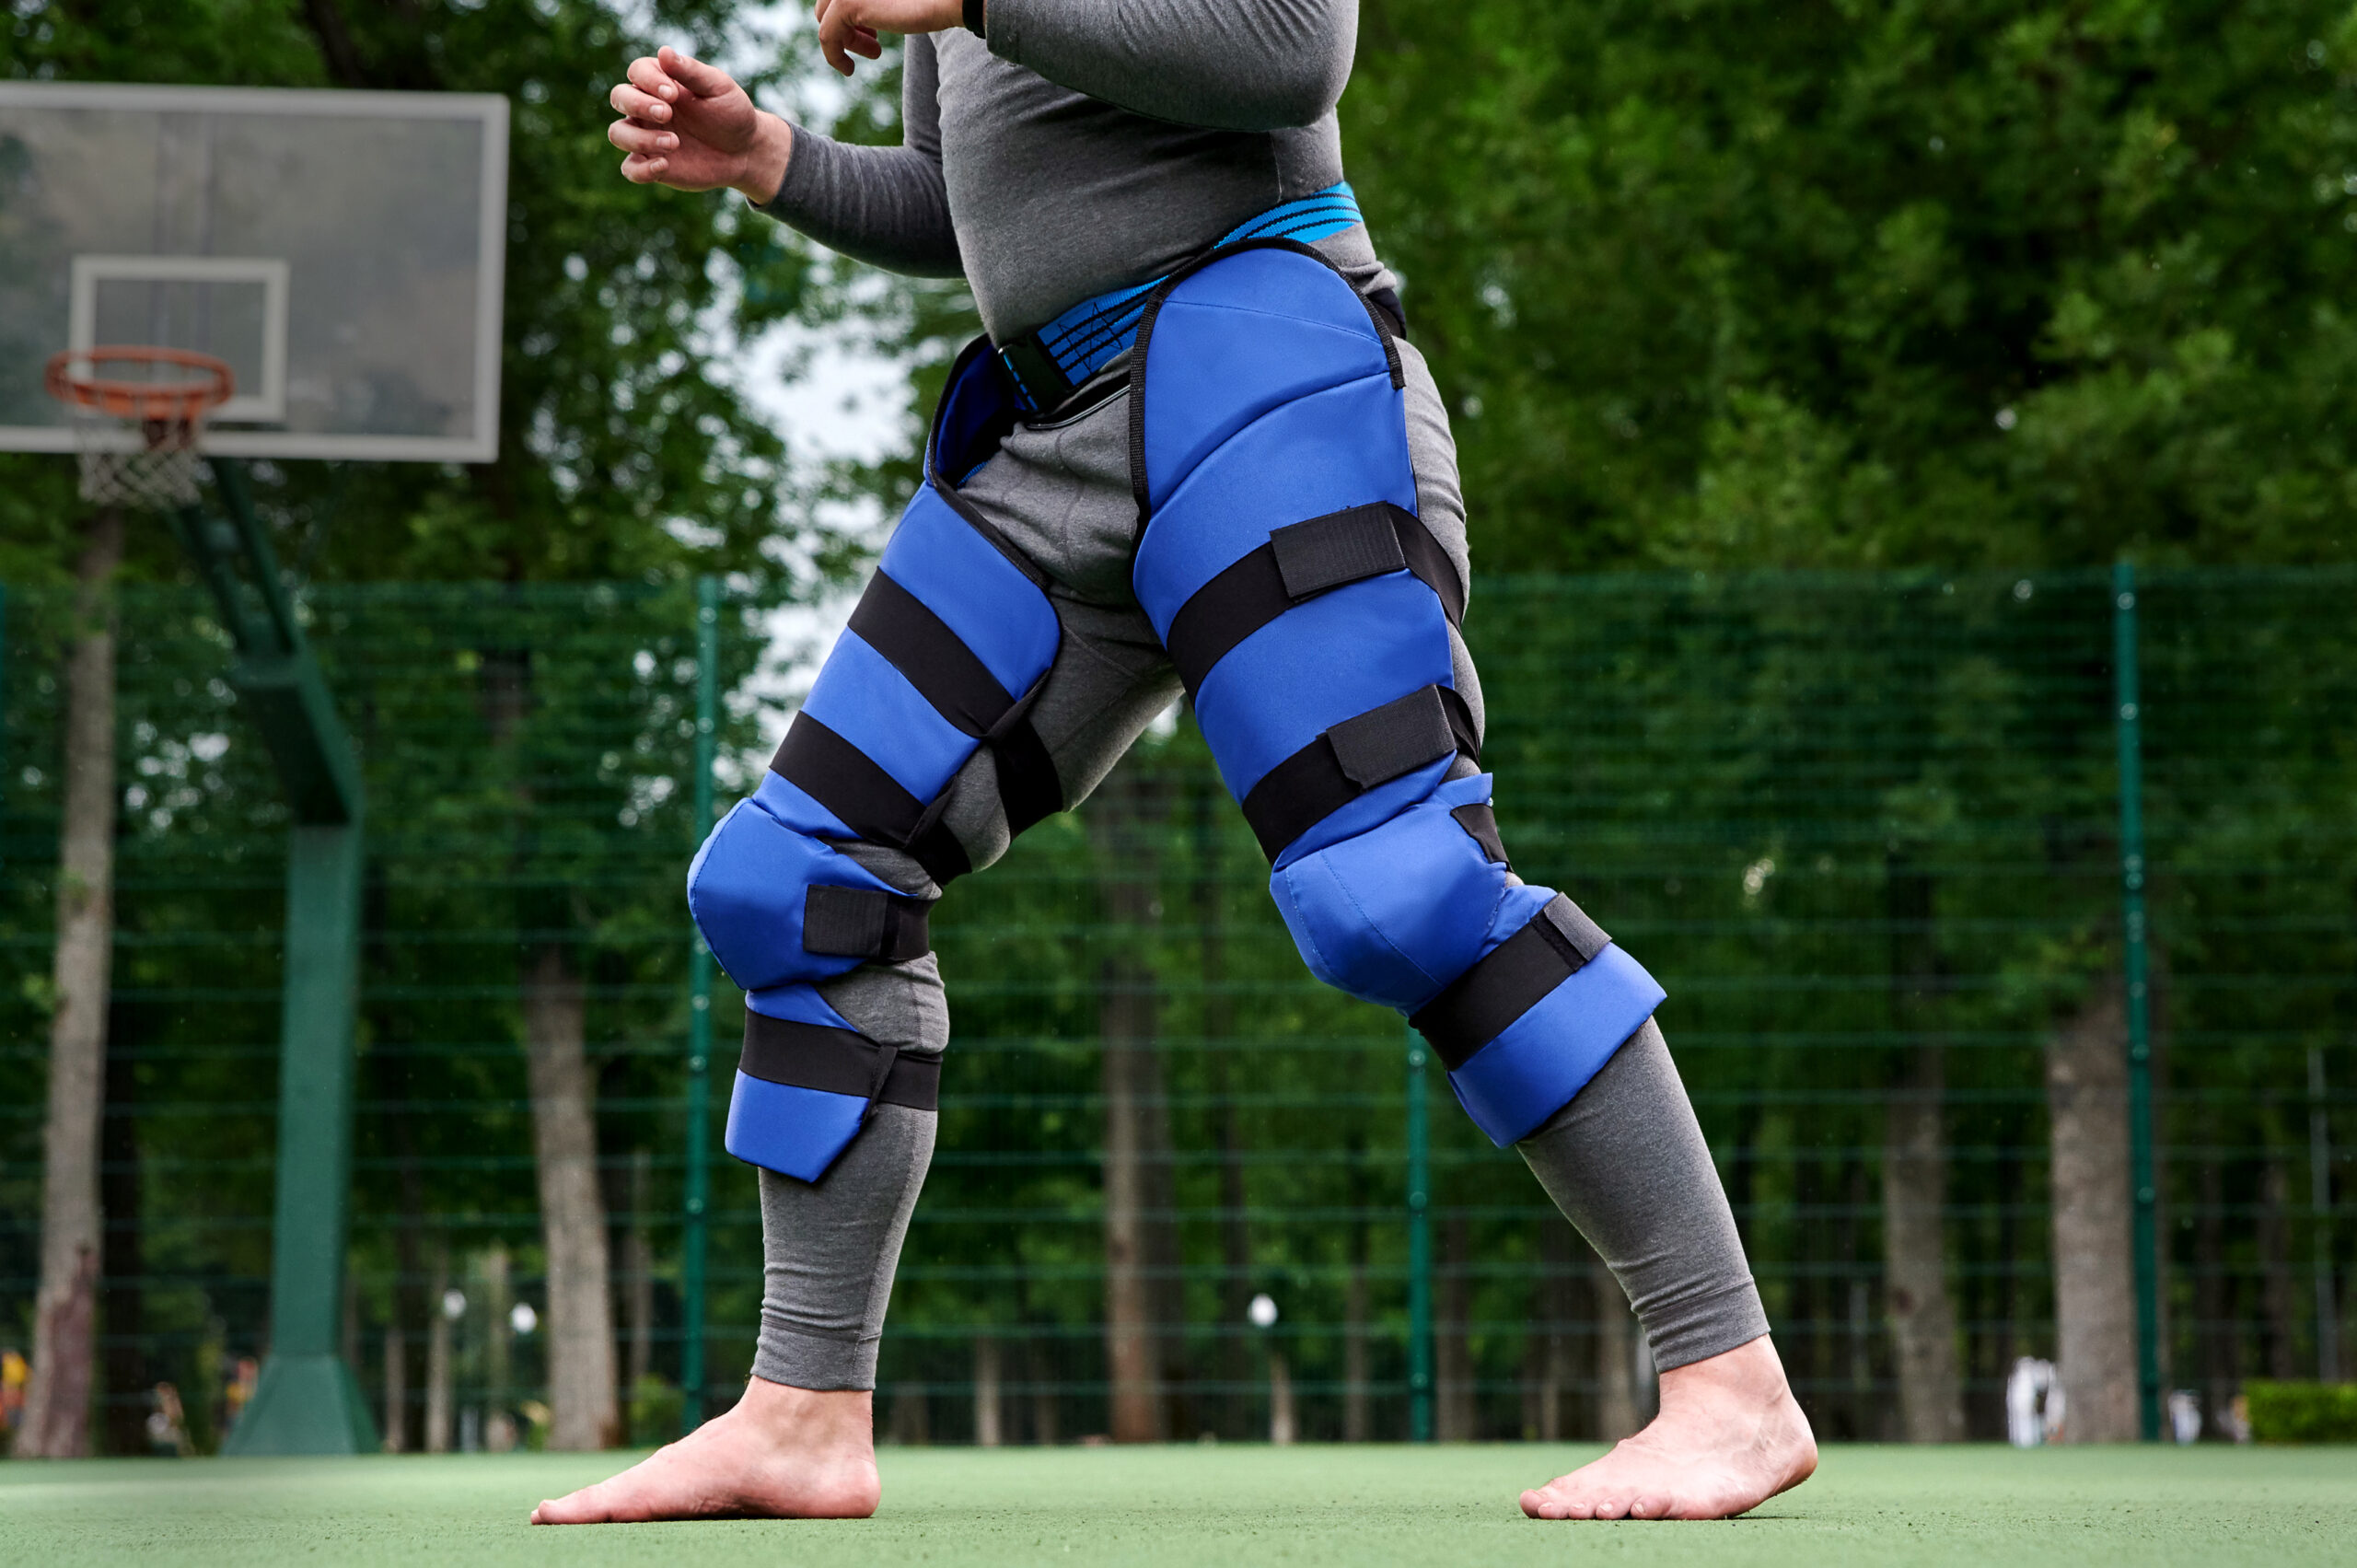 ¾ Leg Protection With Extra Security And Fastening Belt